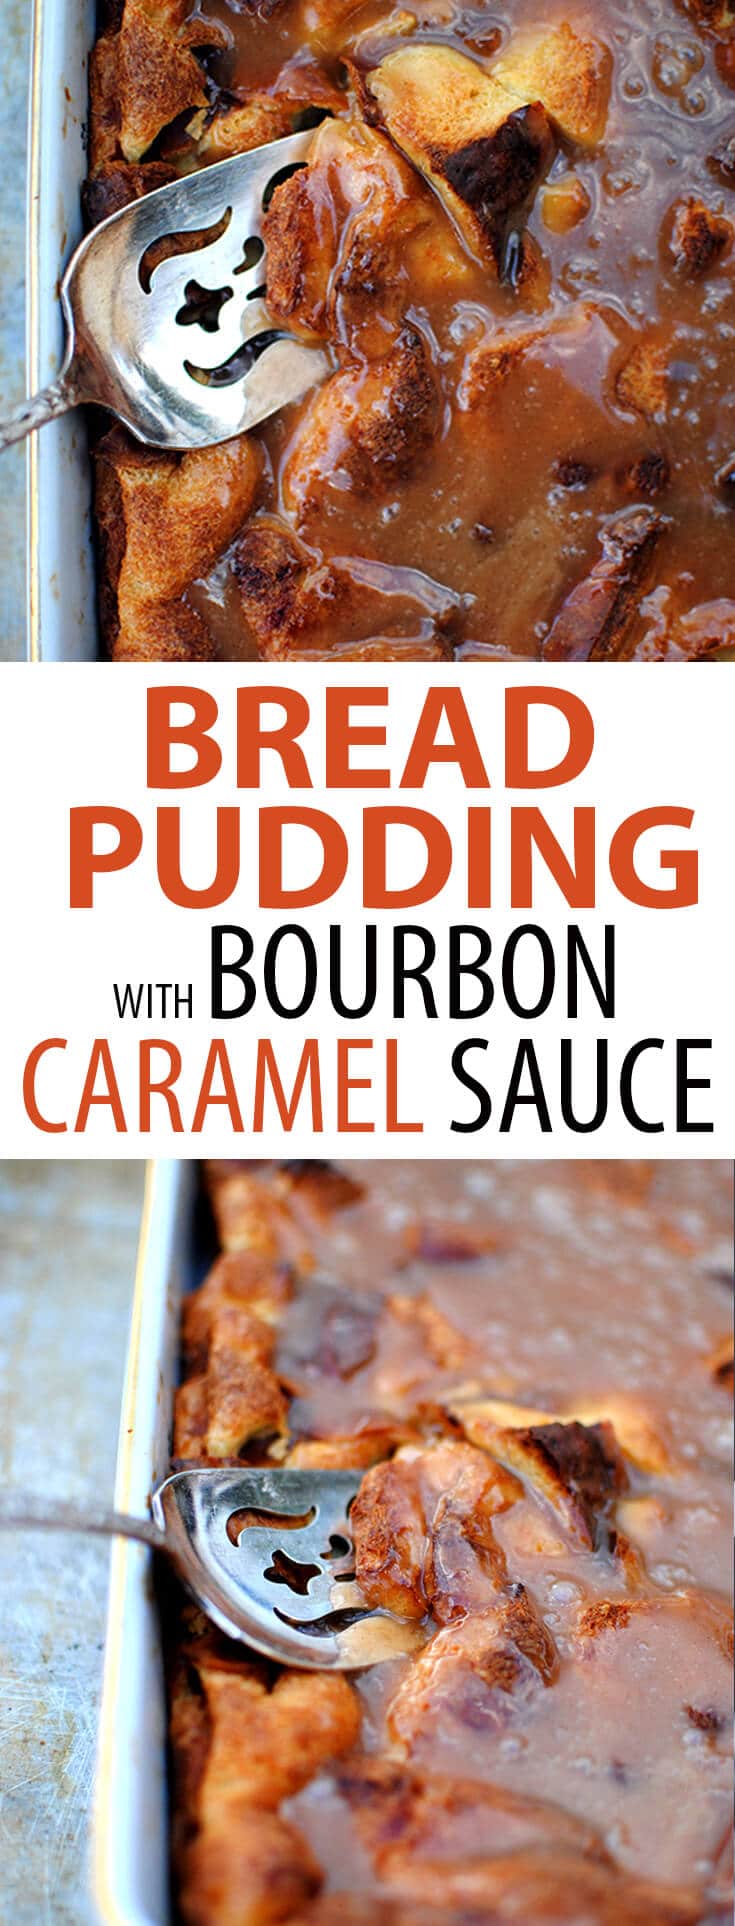 Bread Pudding with Bourbon Caramel Sauce Recipe - Let's Eat Cake